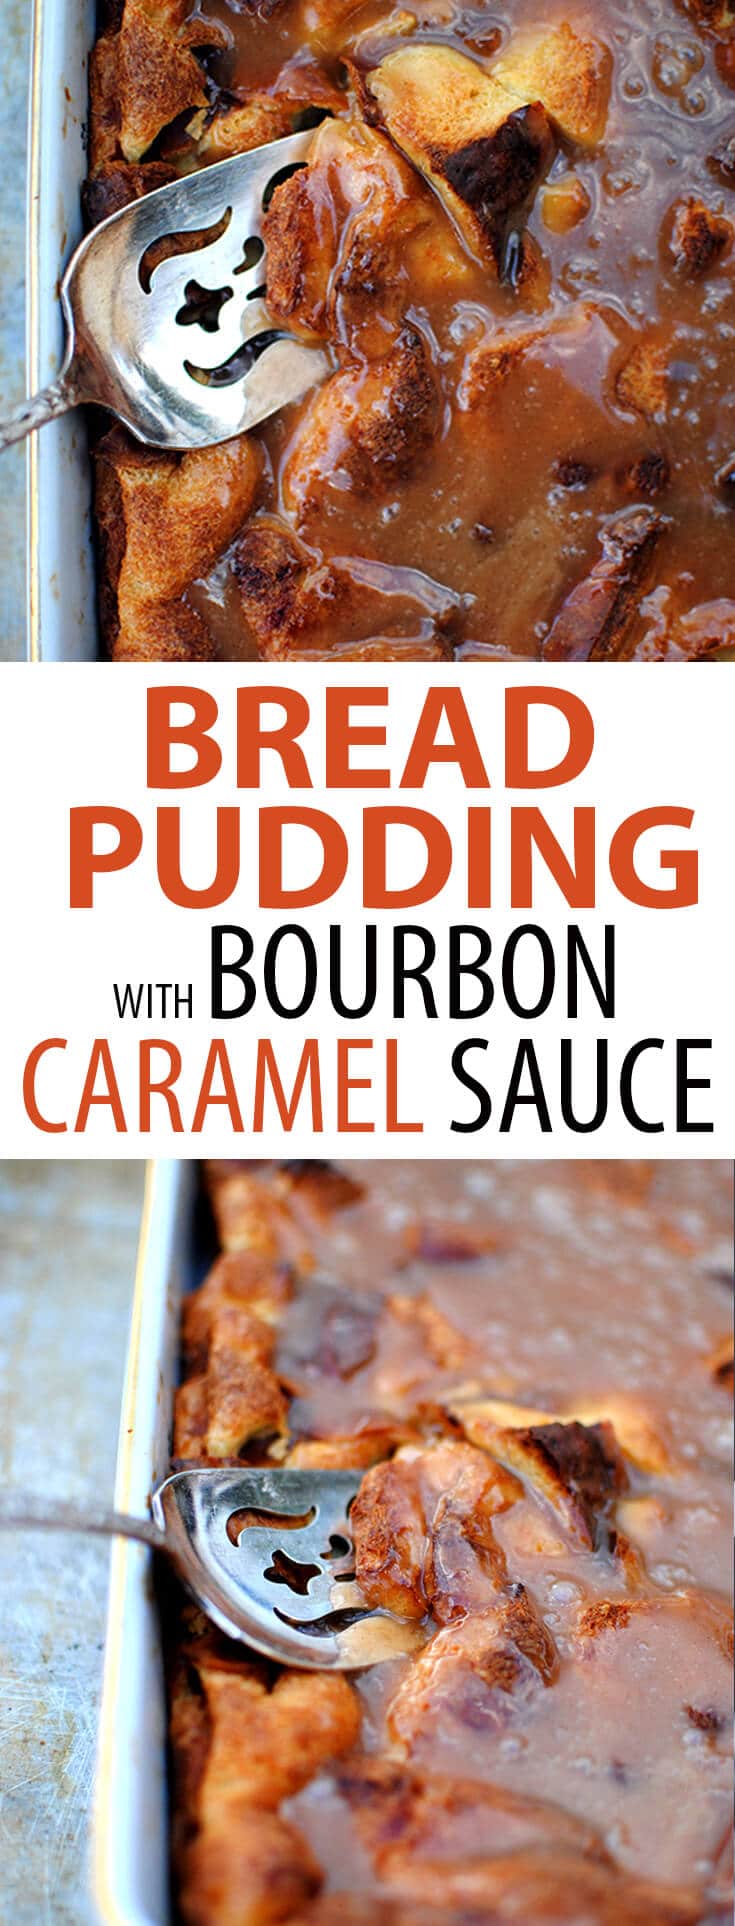 Bread Pudding with Bourbon Caramel Sauce Recipe - Let's Eat Cake